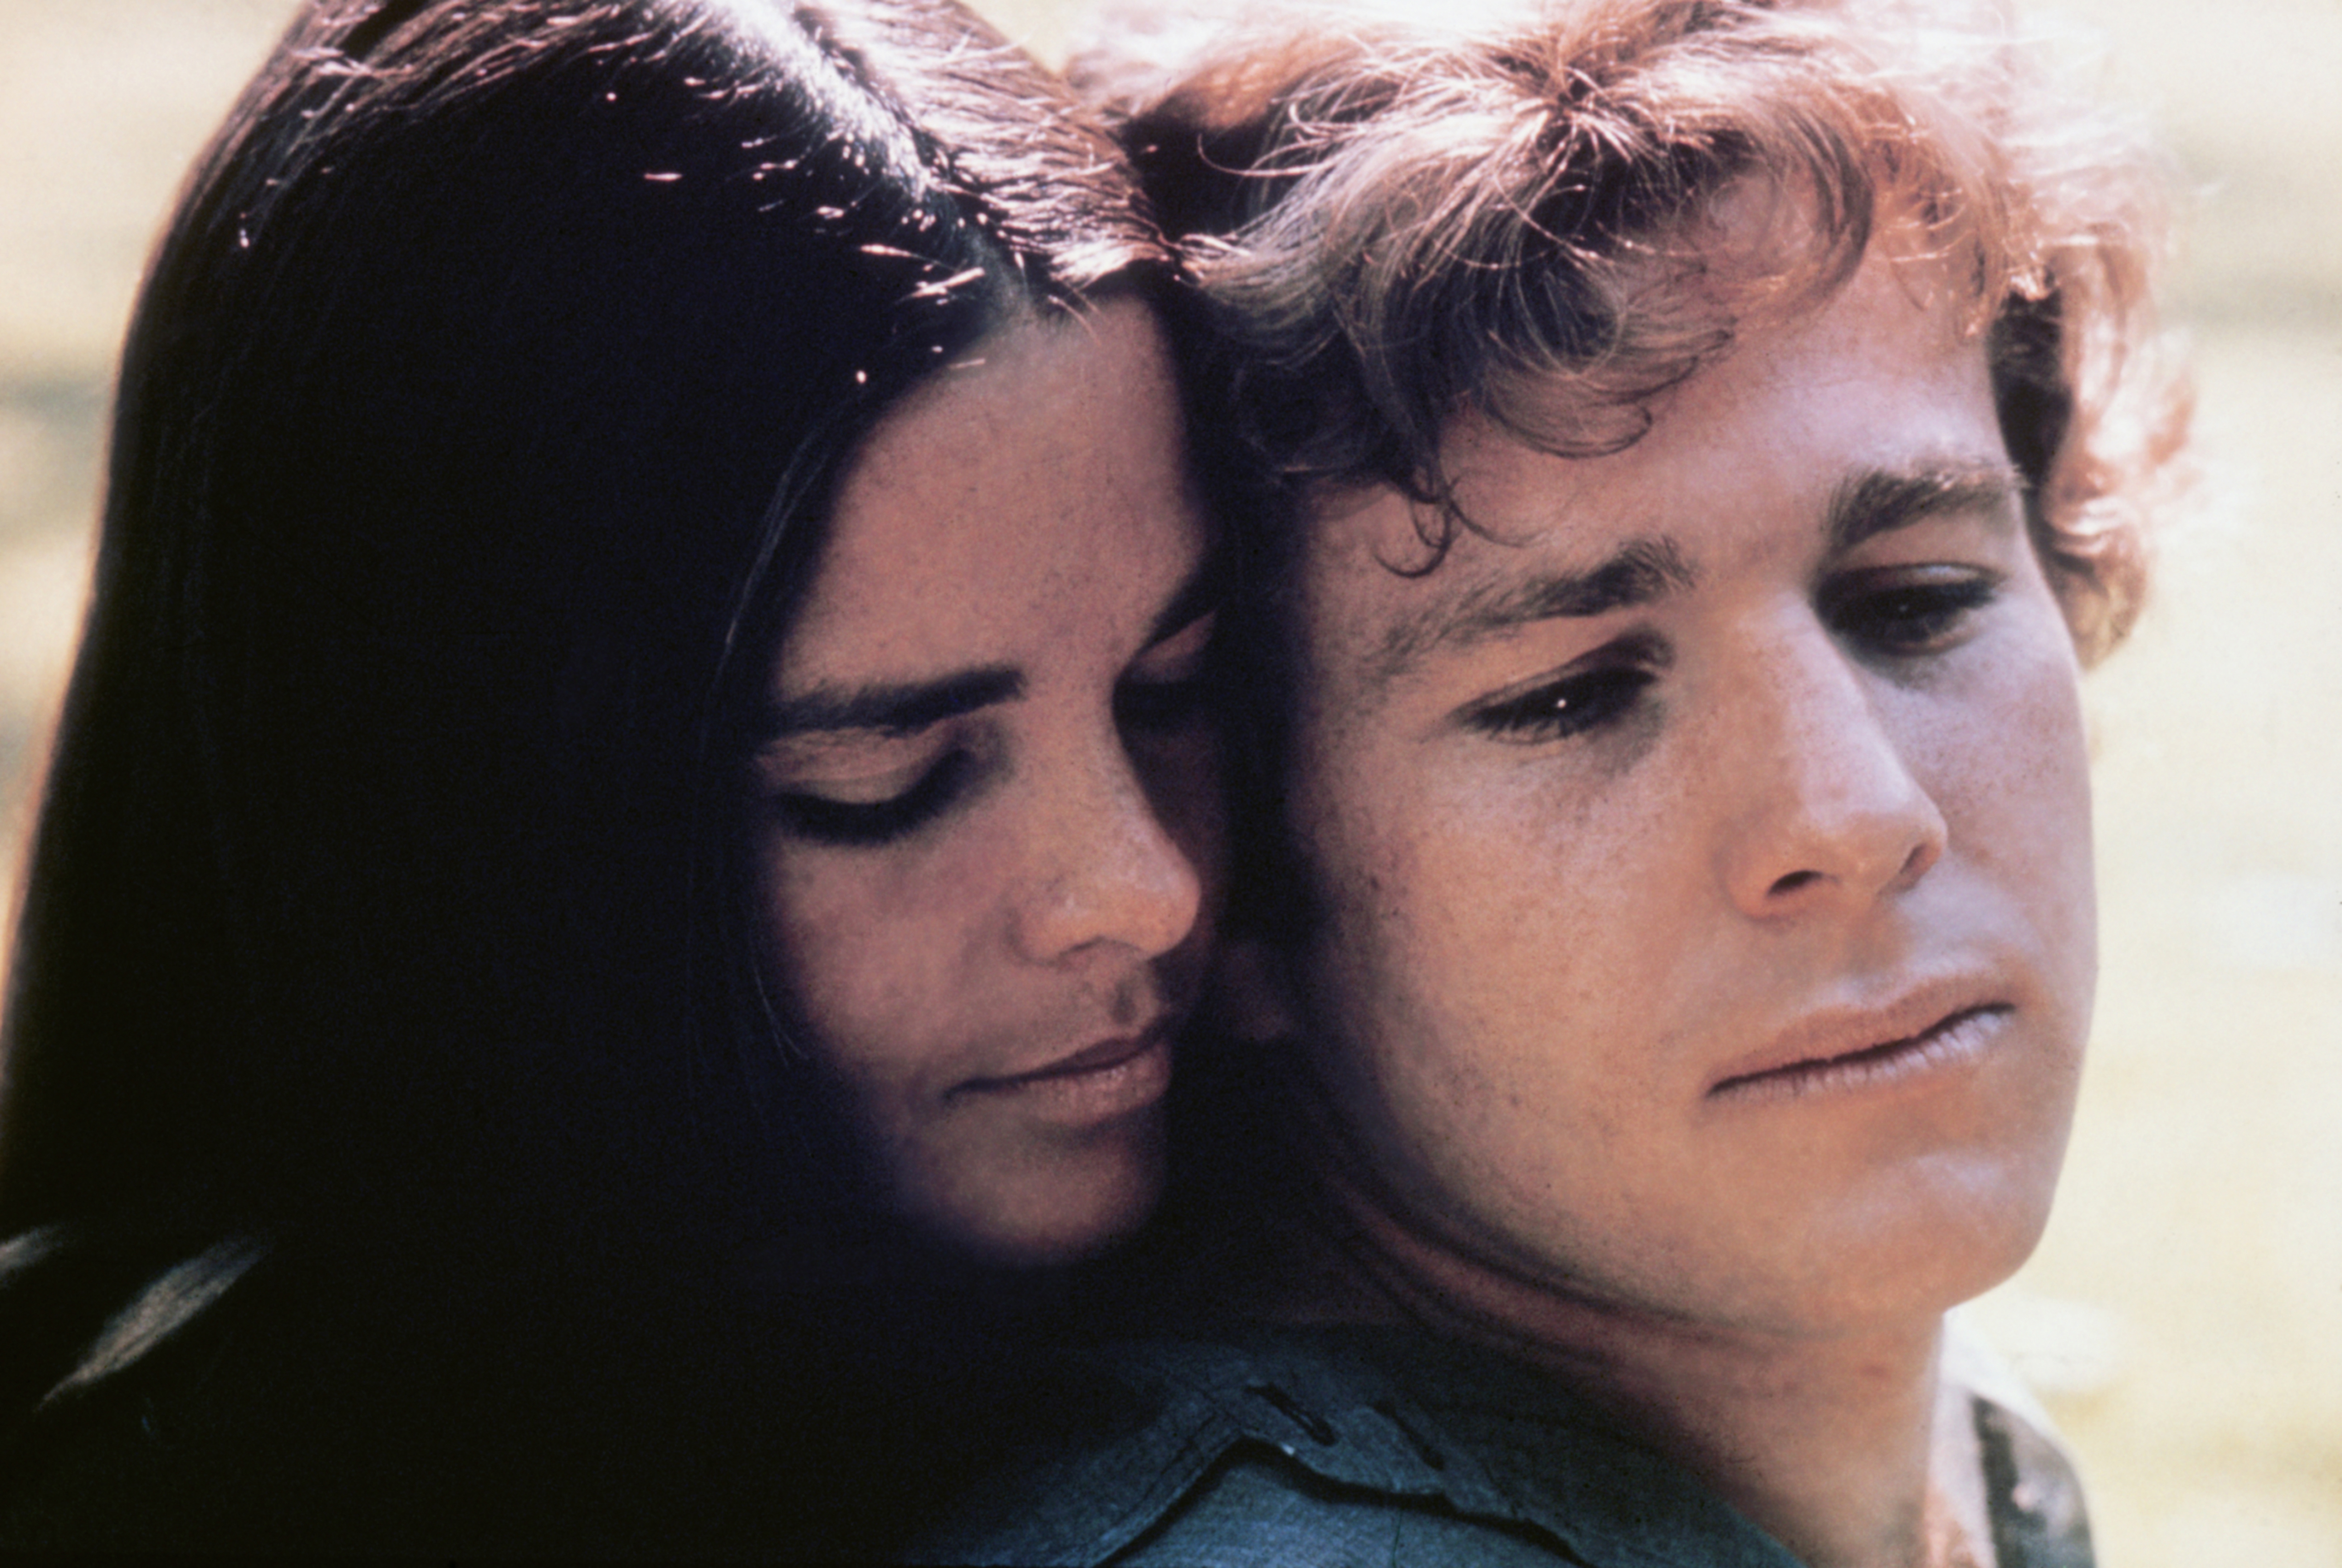 Ali MacGraw as Jennifer Cavalleri and Ryan O'Neal as Oliver Barrett IV in a scene from the 1970 movie, "Love Story." | Source: Getty Images